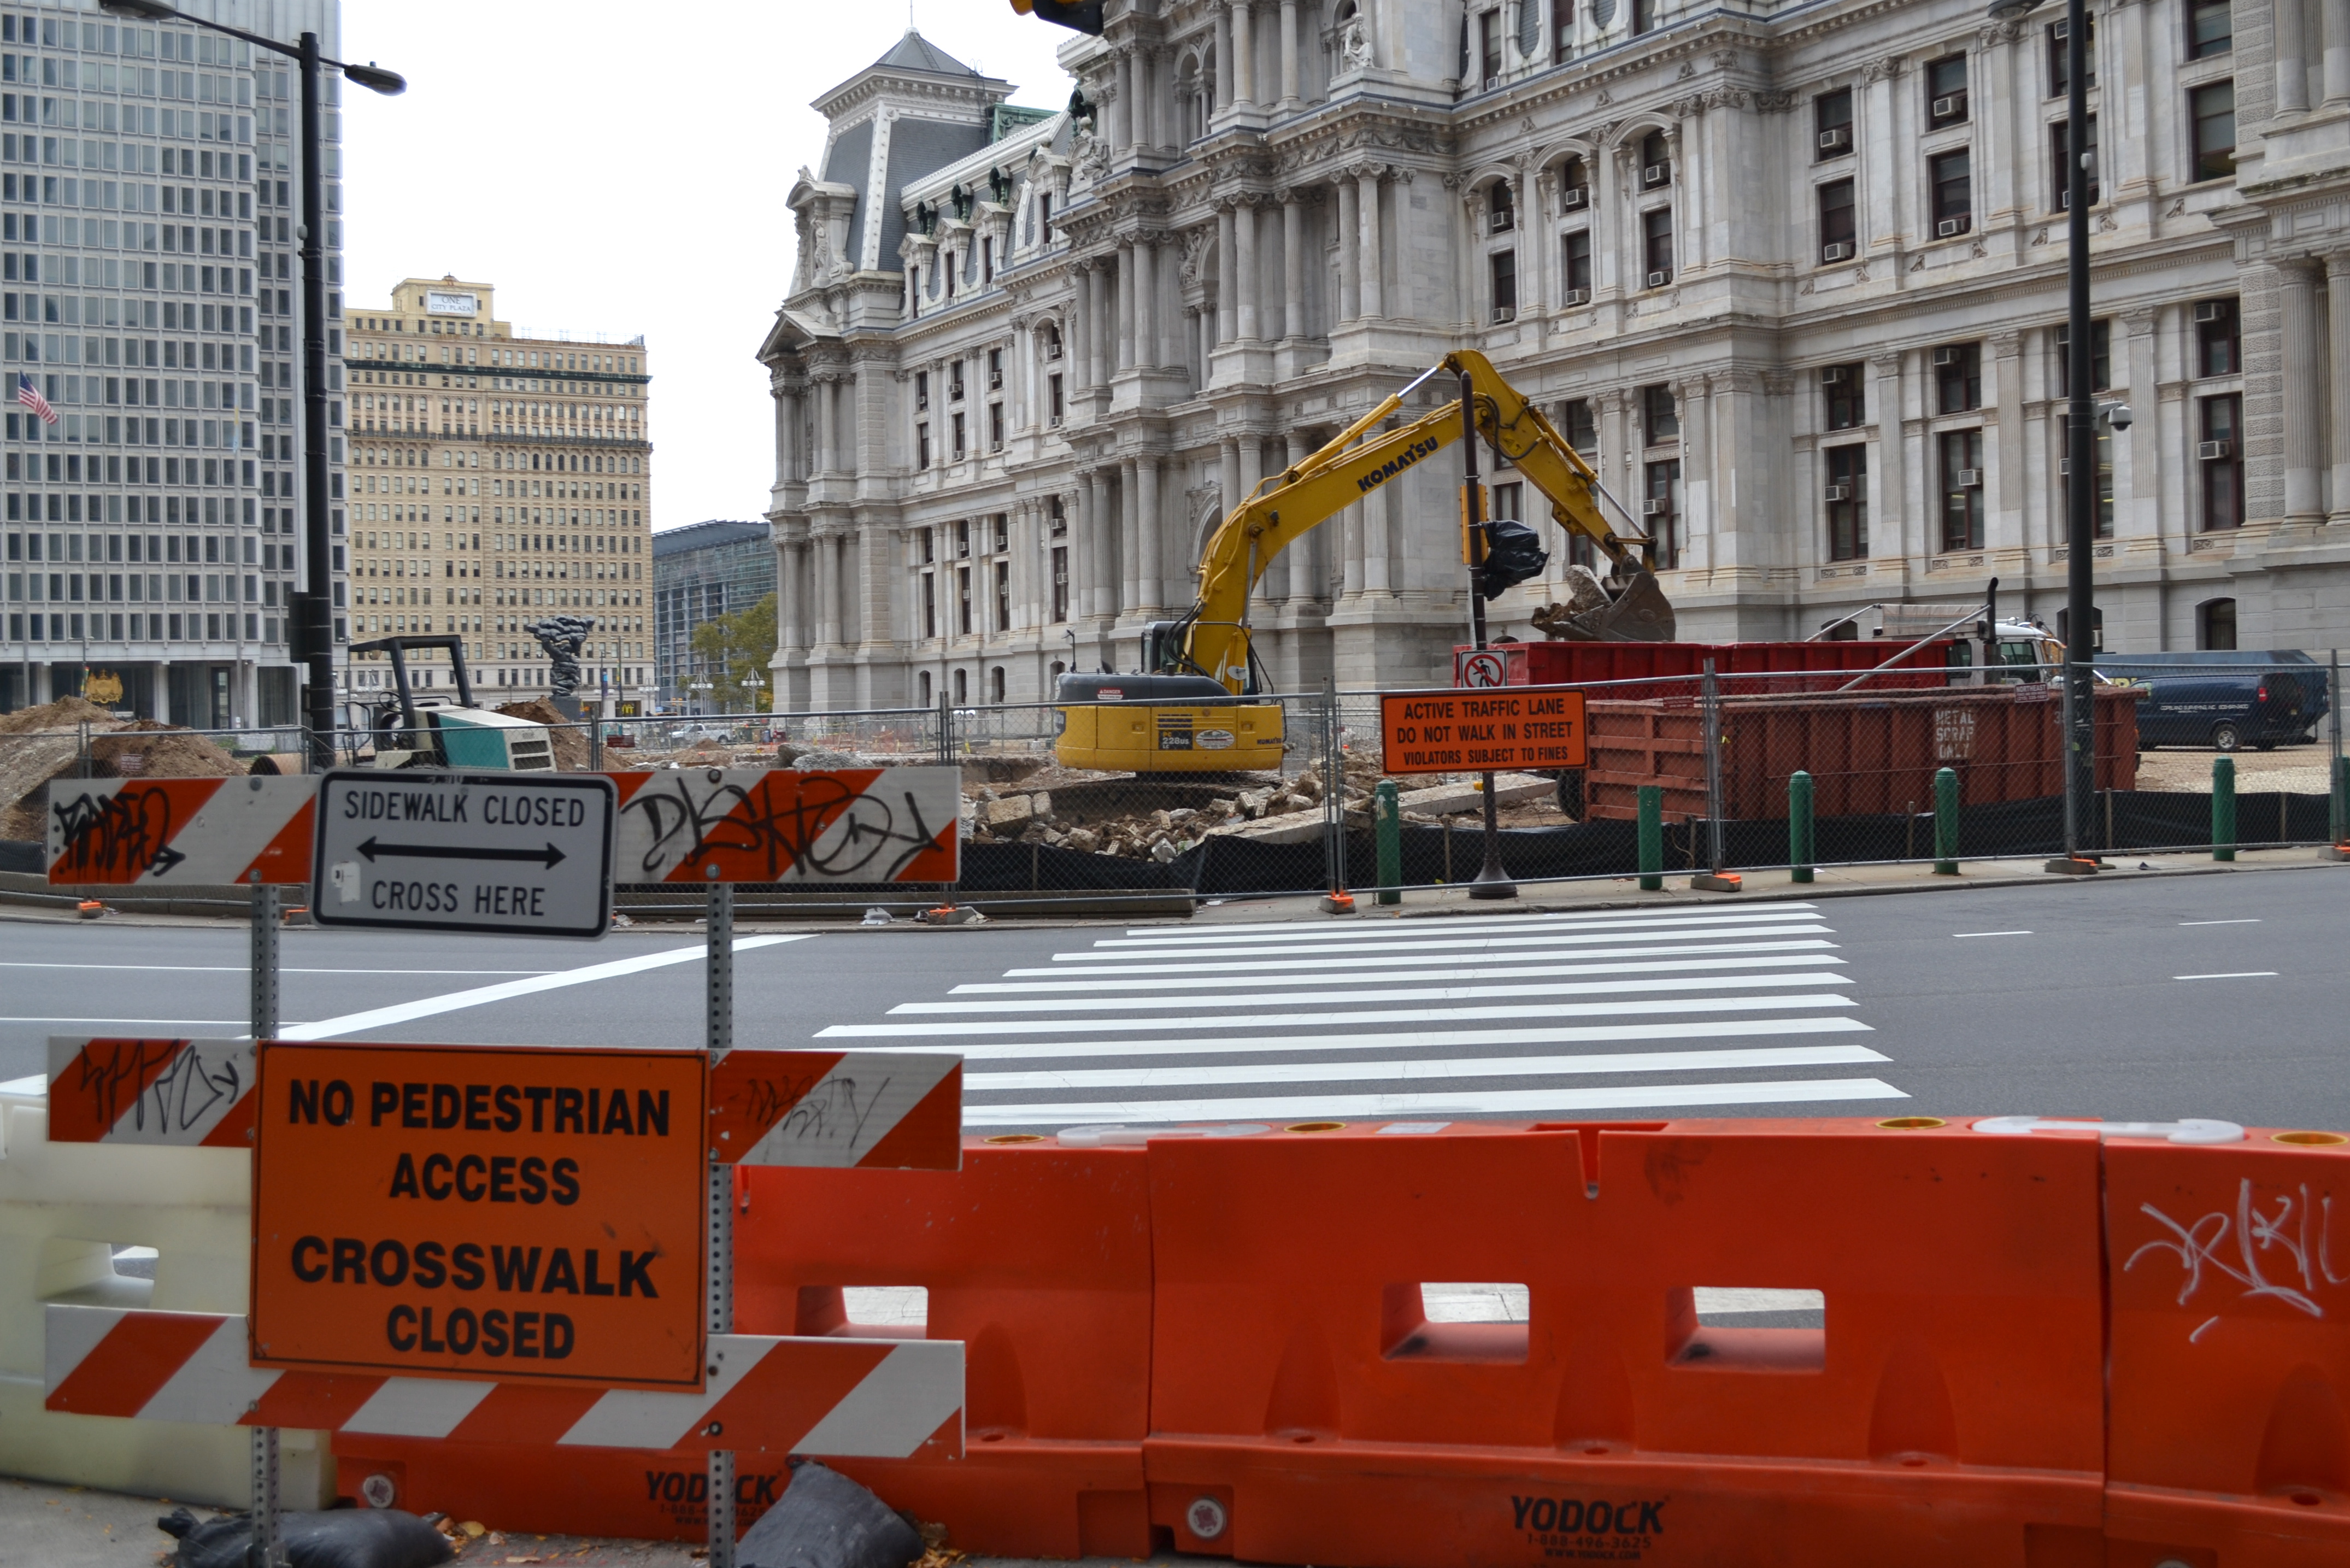 Since construction began, additional signs have gone up to instruct pedestrians